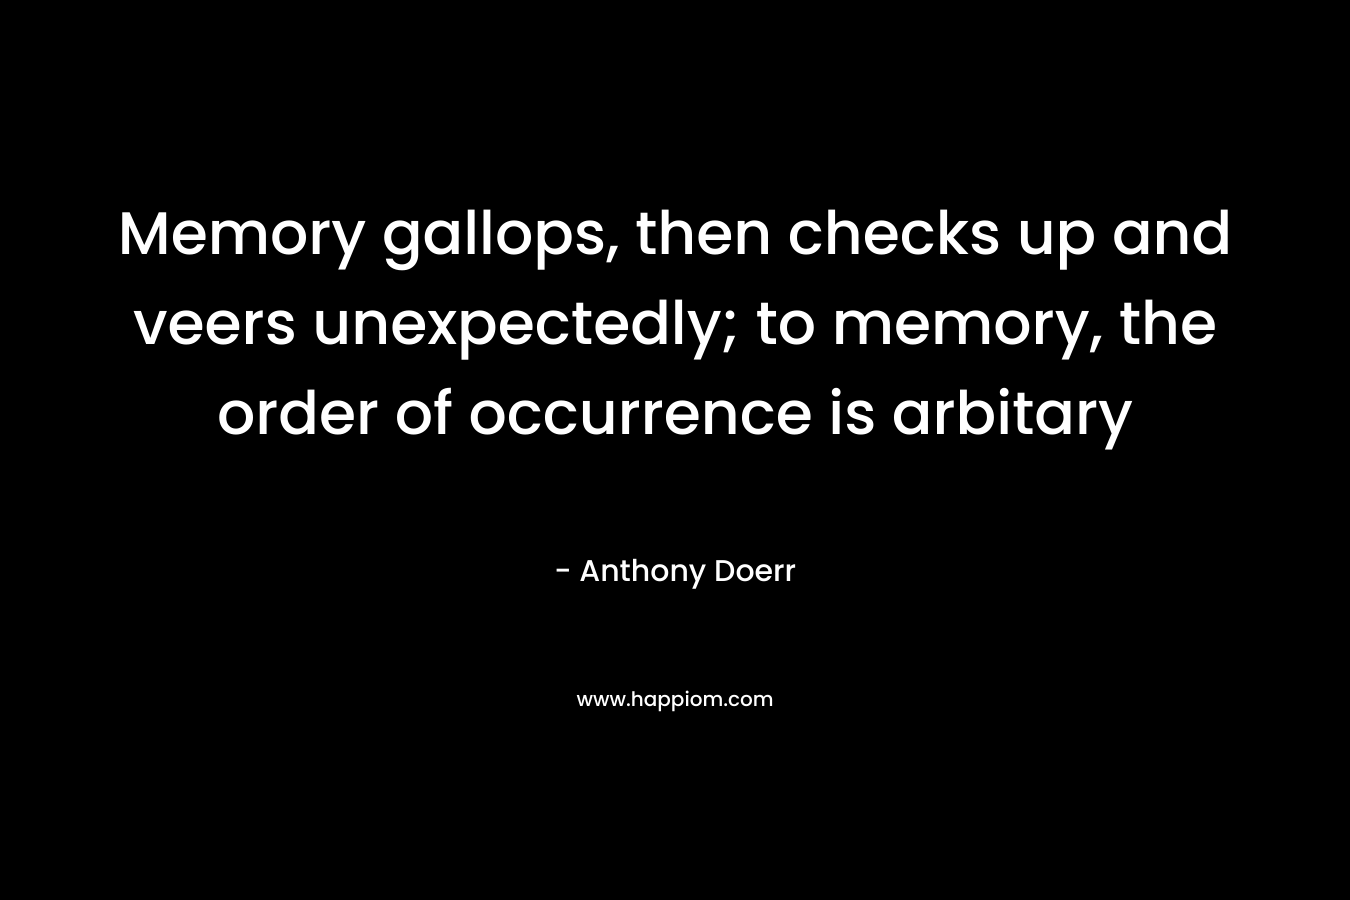 Memory gallops, then checks up and veers unexpectedly; to memory, the order of occurrence is arbitary – Anthony Doerr